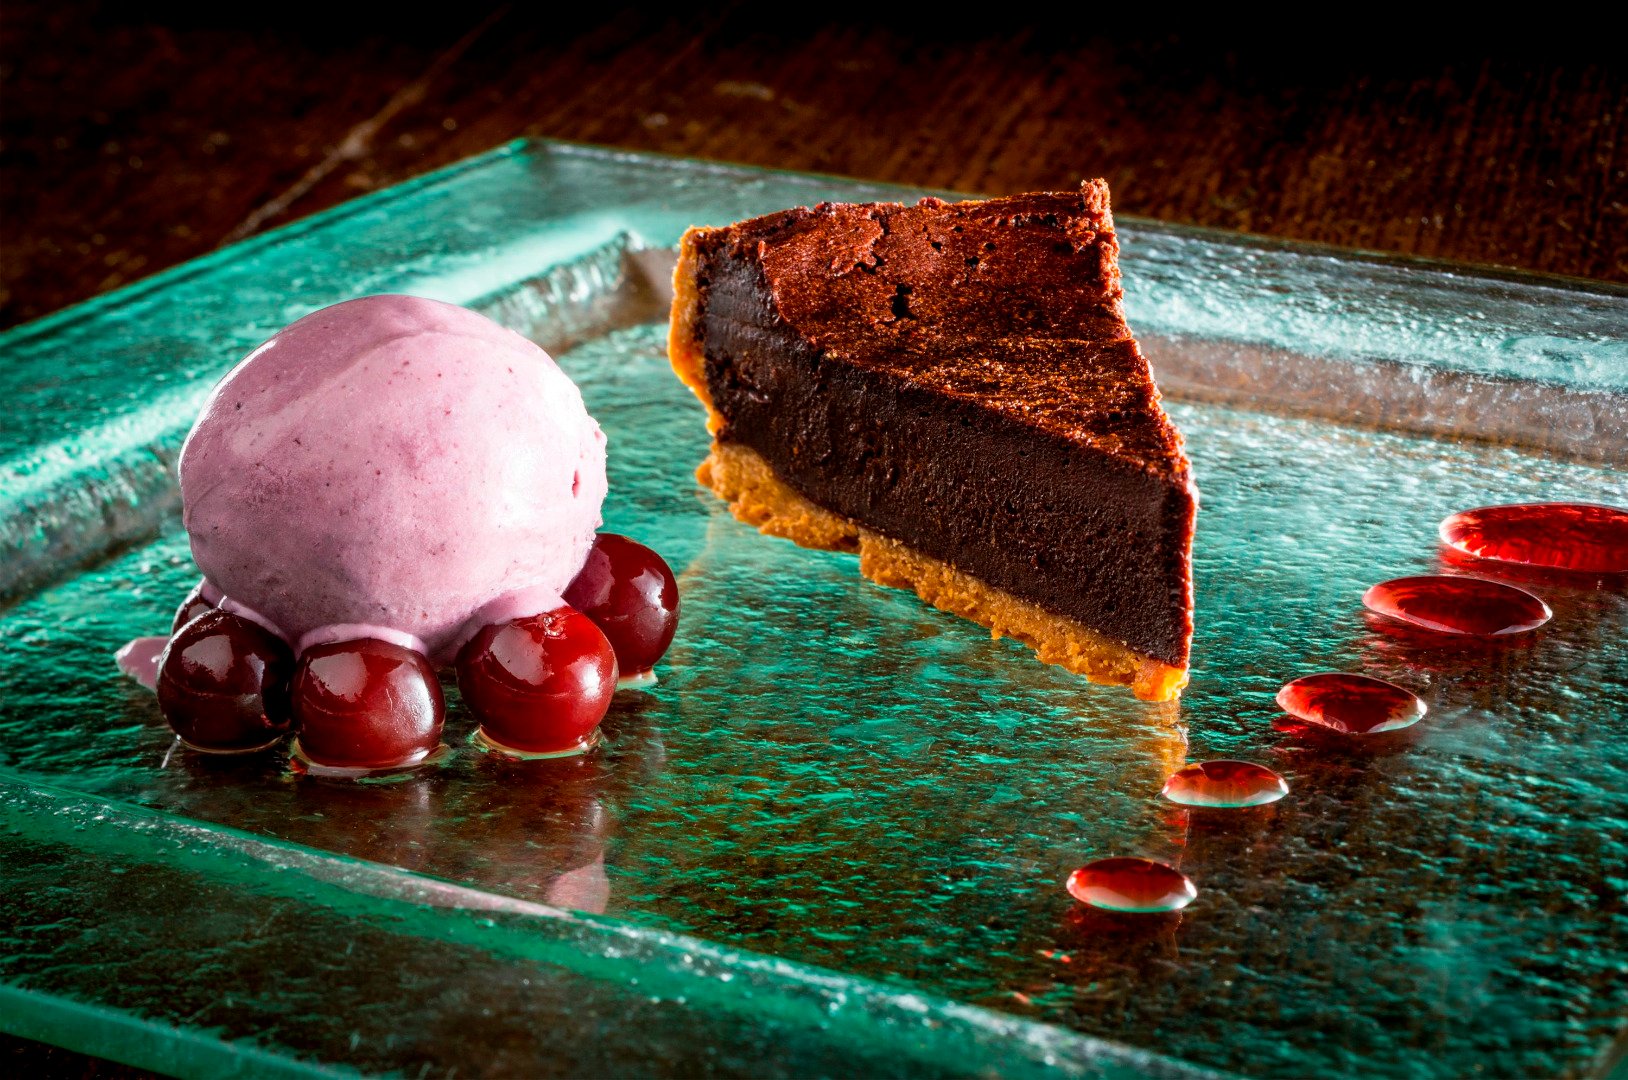 Image name homemade chocolate tart with cherry ice cream cherries the blue lion inn east witton the good pub guide inn of the year 20141 the 1 image from the post Eating out in the Yorkshire Dales in Yorkshire.com.